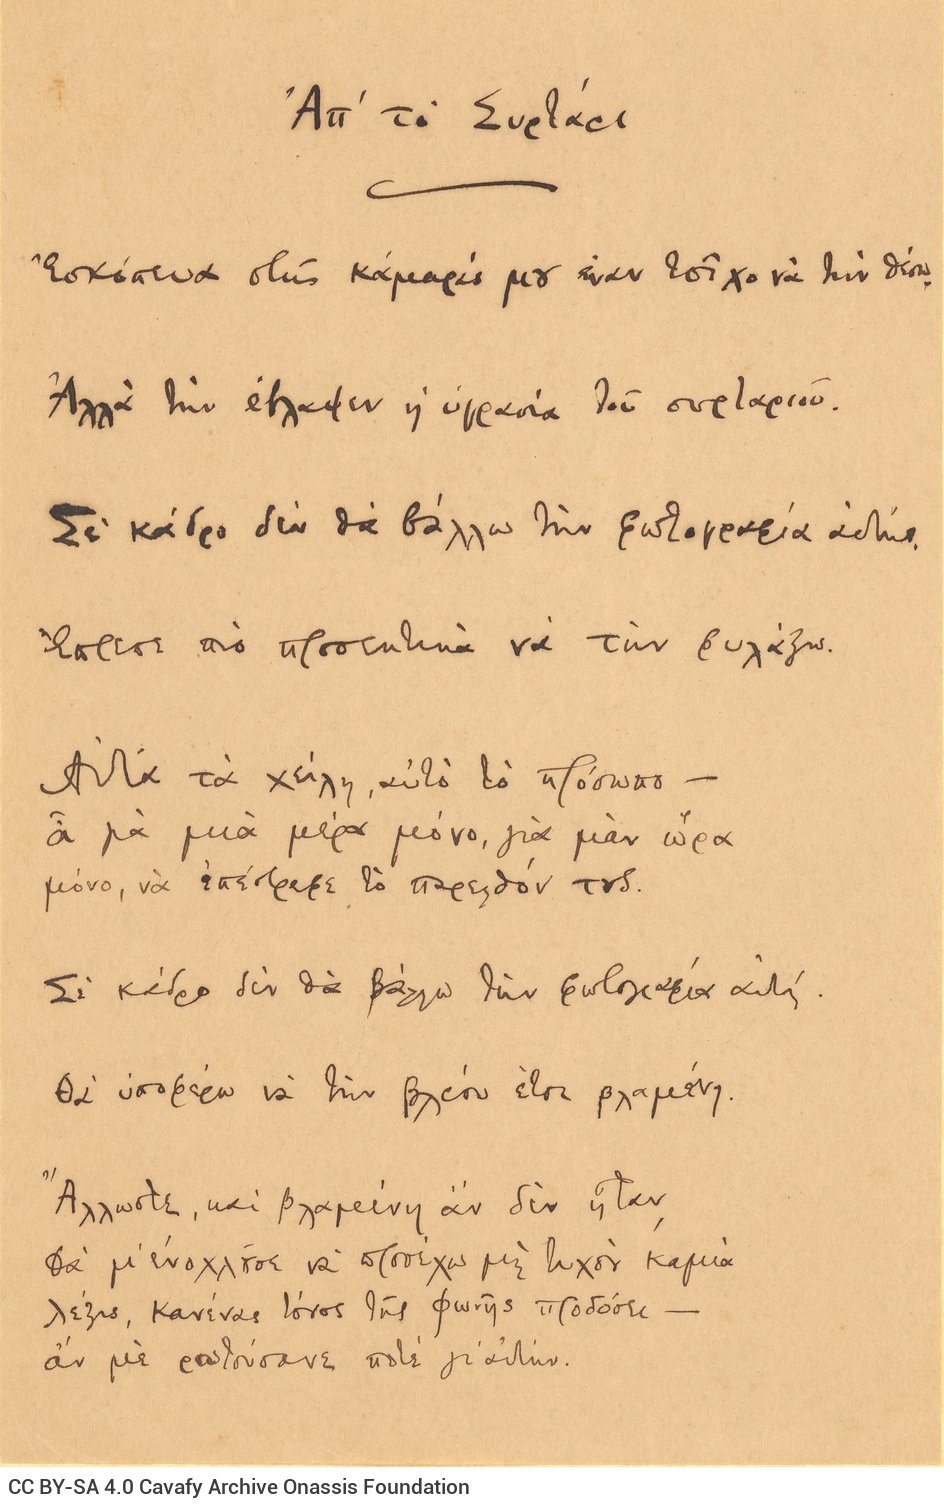 Manuscript of the poem "From the Drawer".